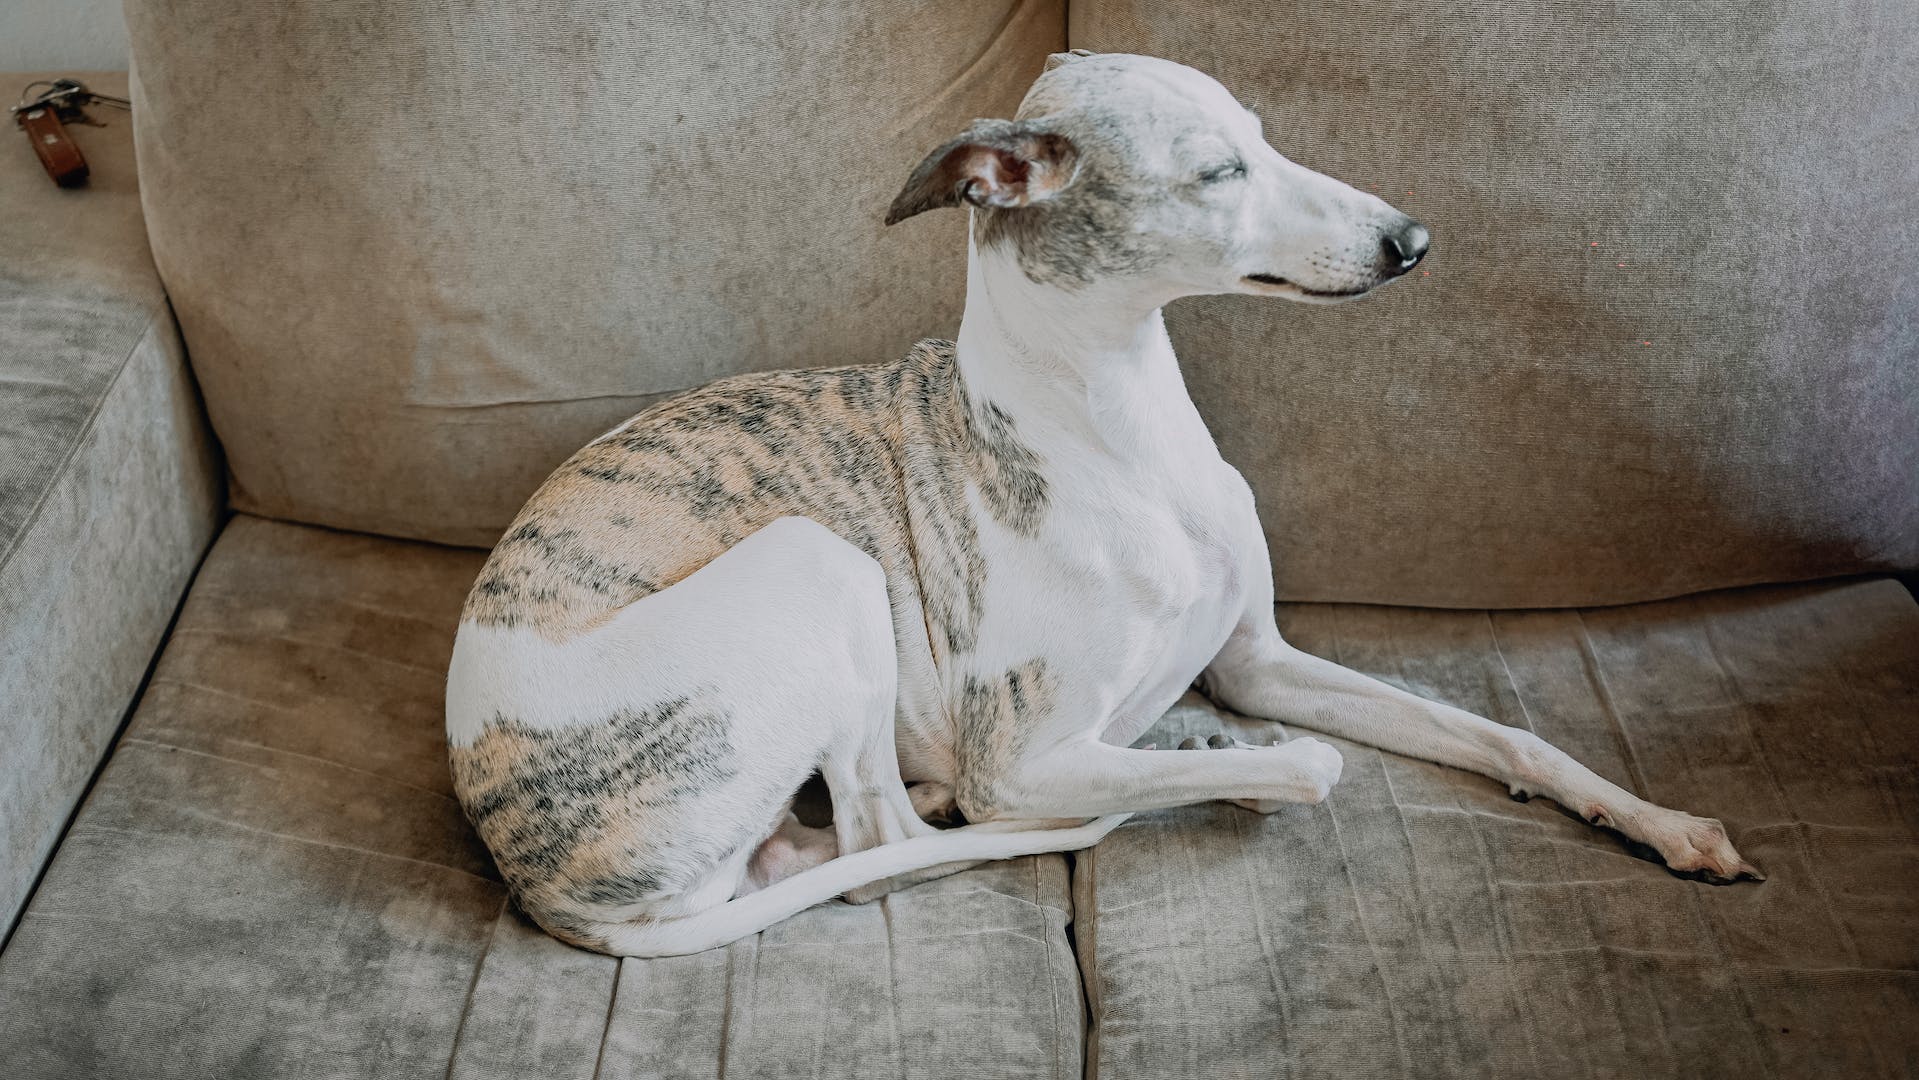 A Whippet taking a nap upright on a couch